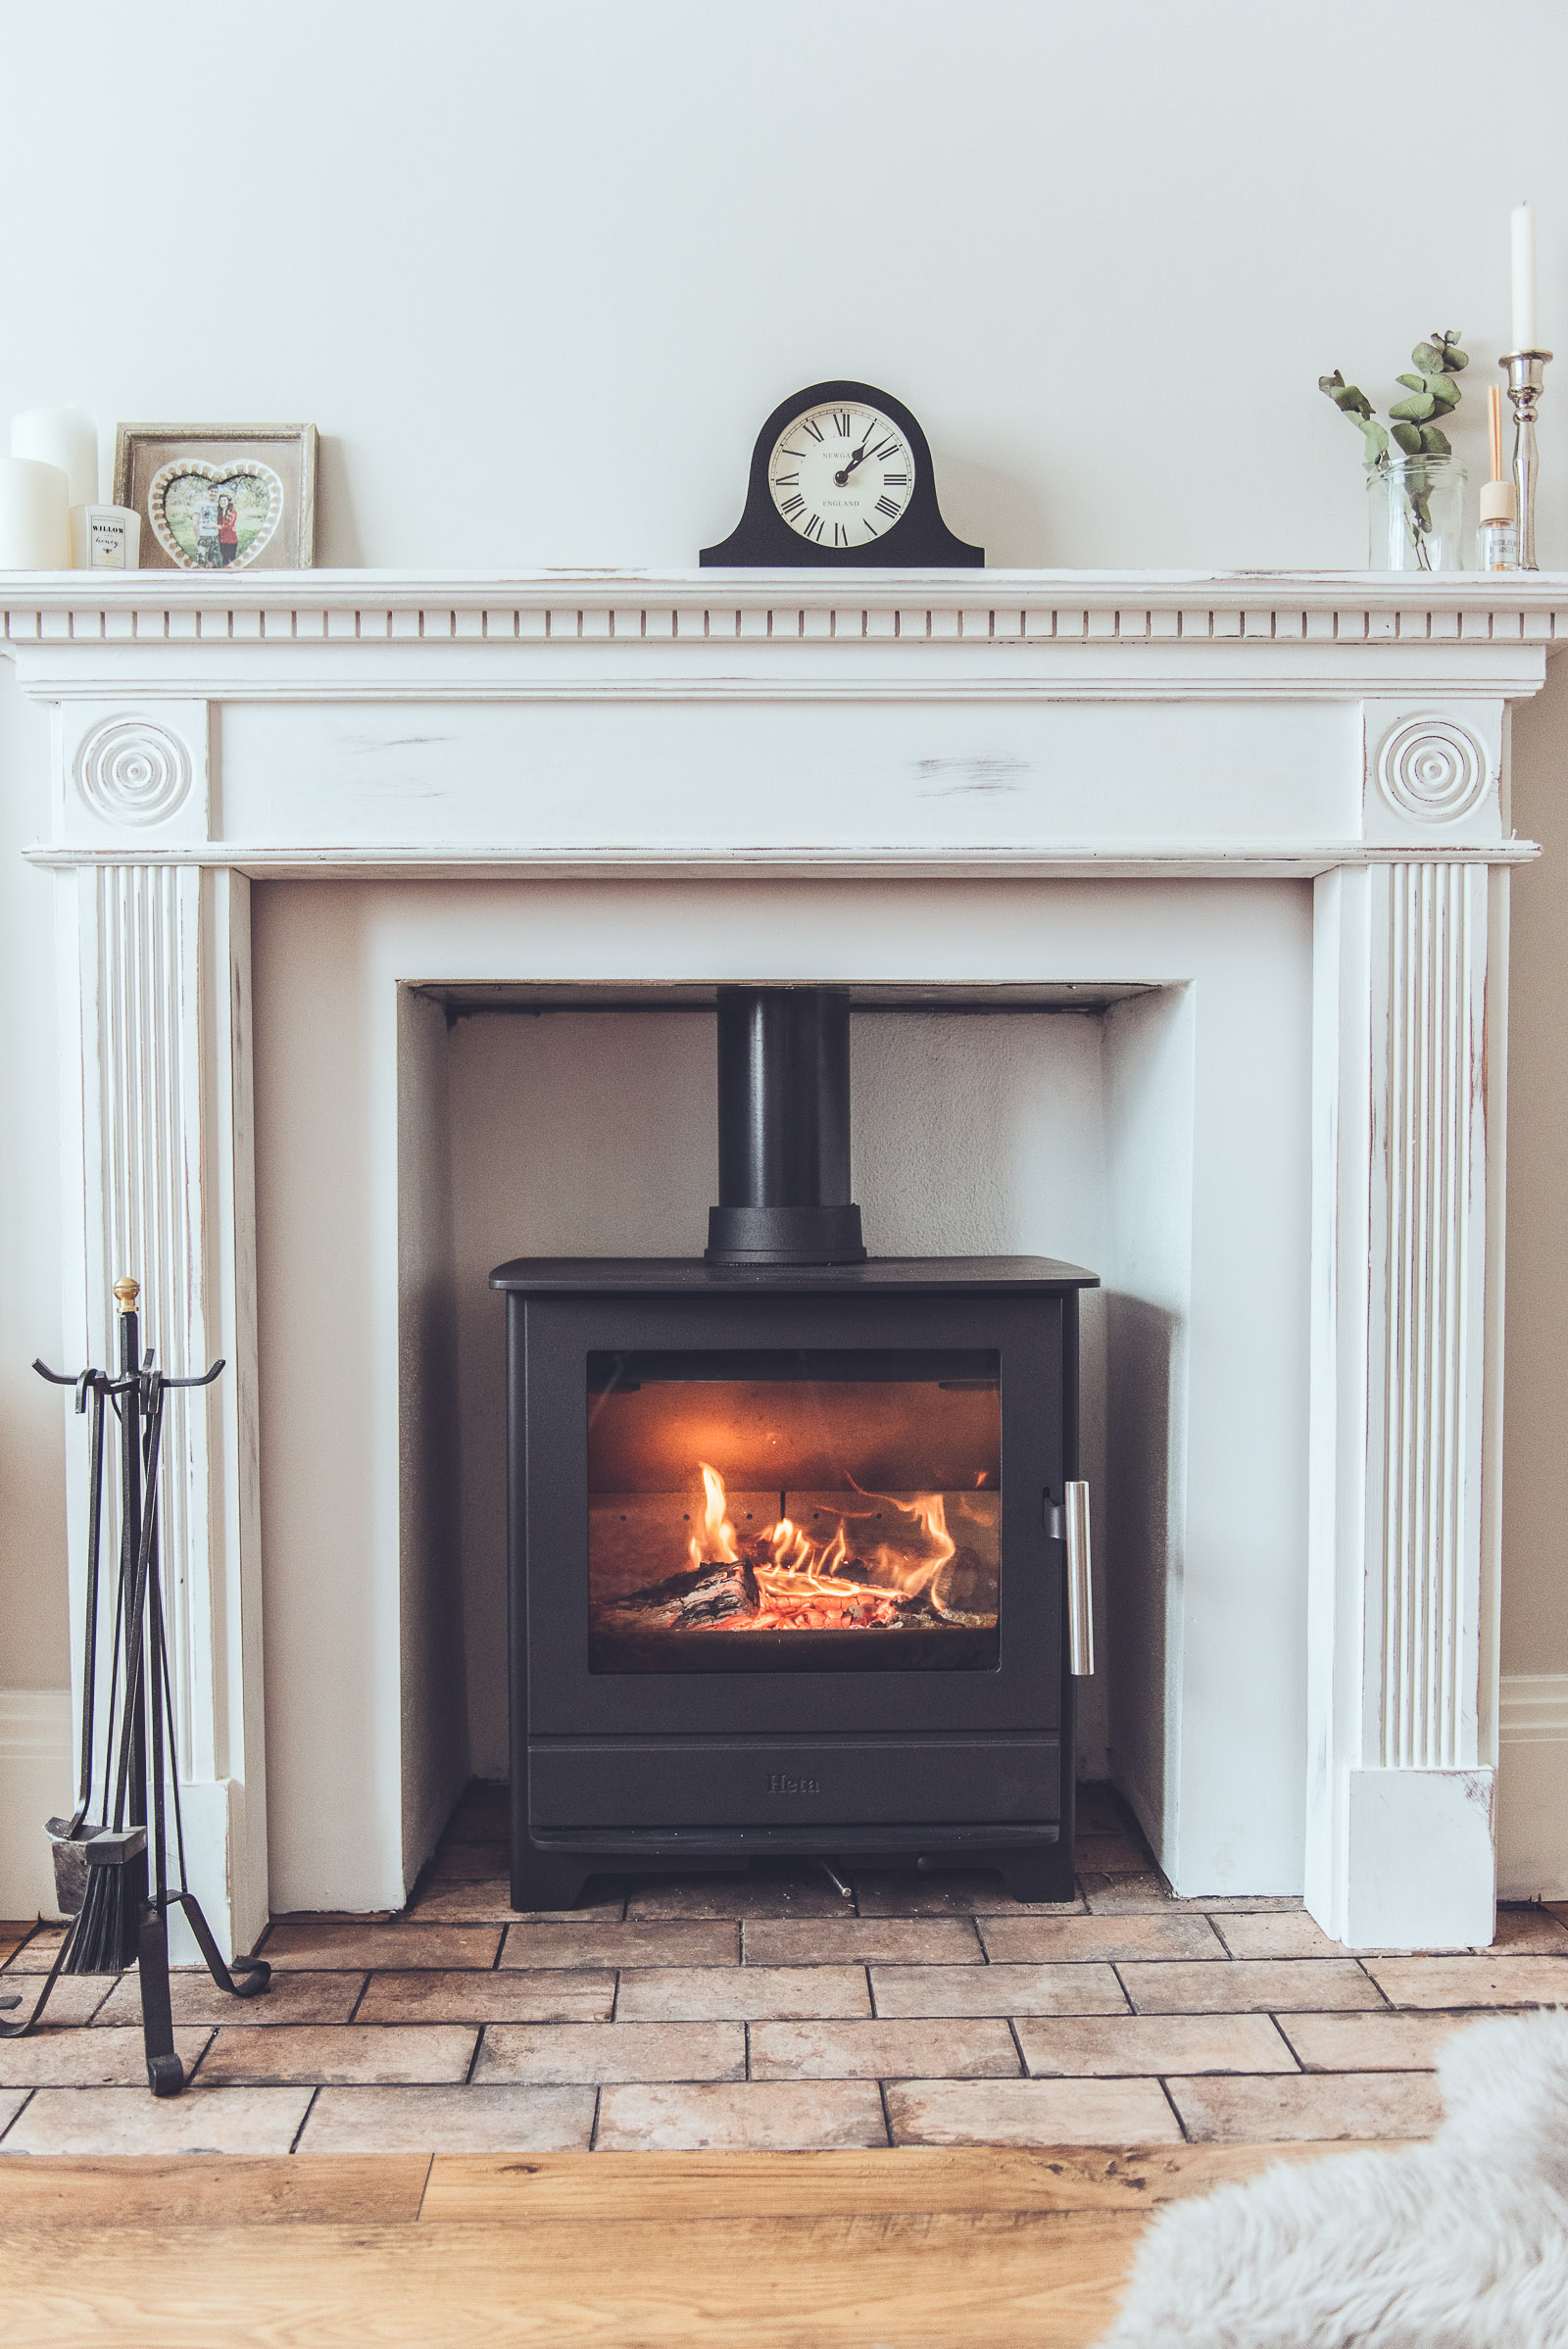 Heta Inspire wood burning stove, Local company in Brighton but also available here, £999